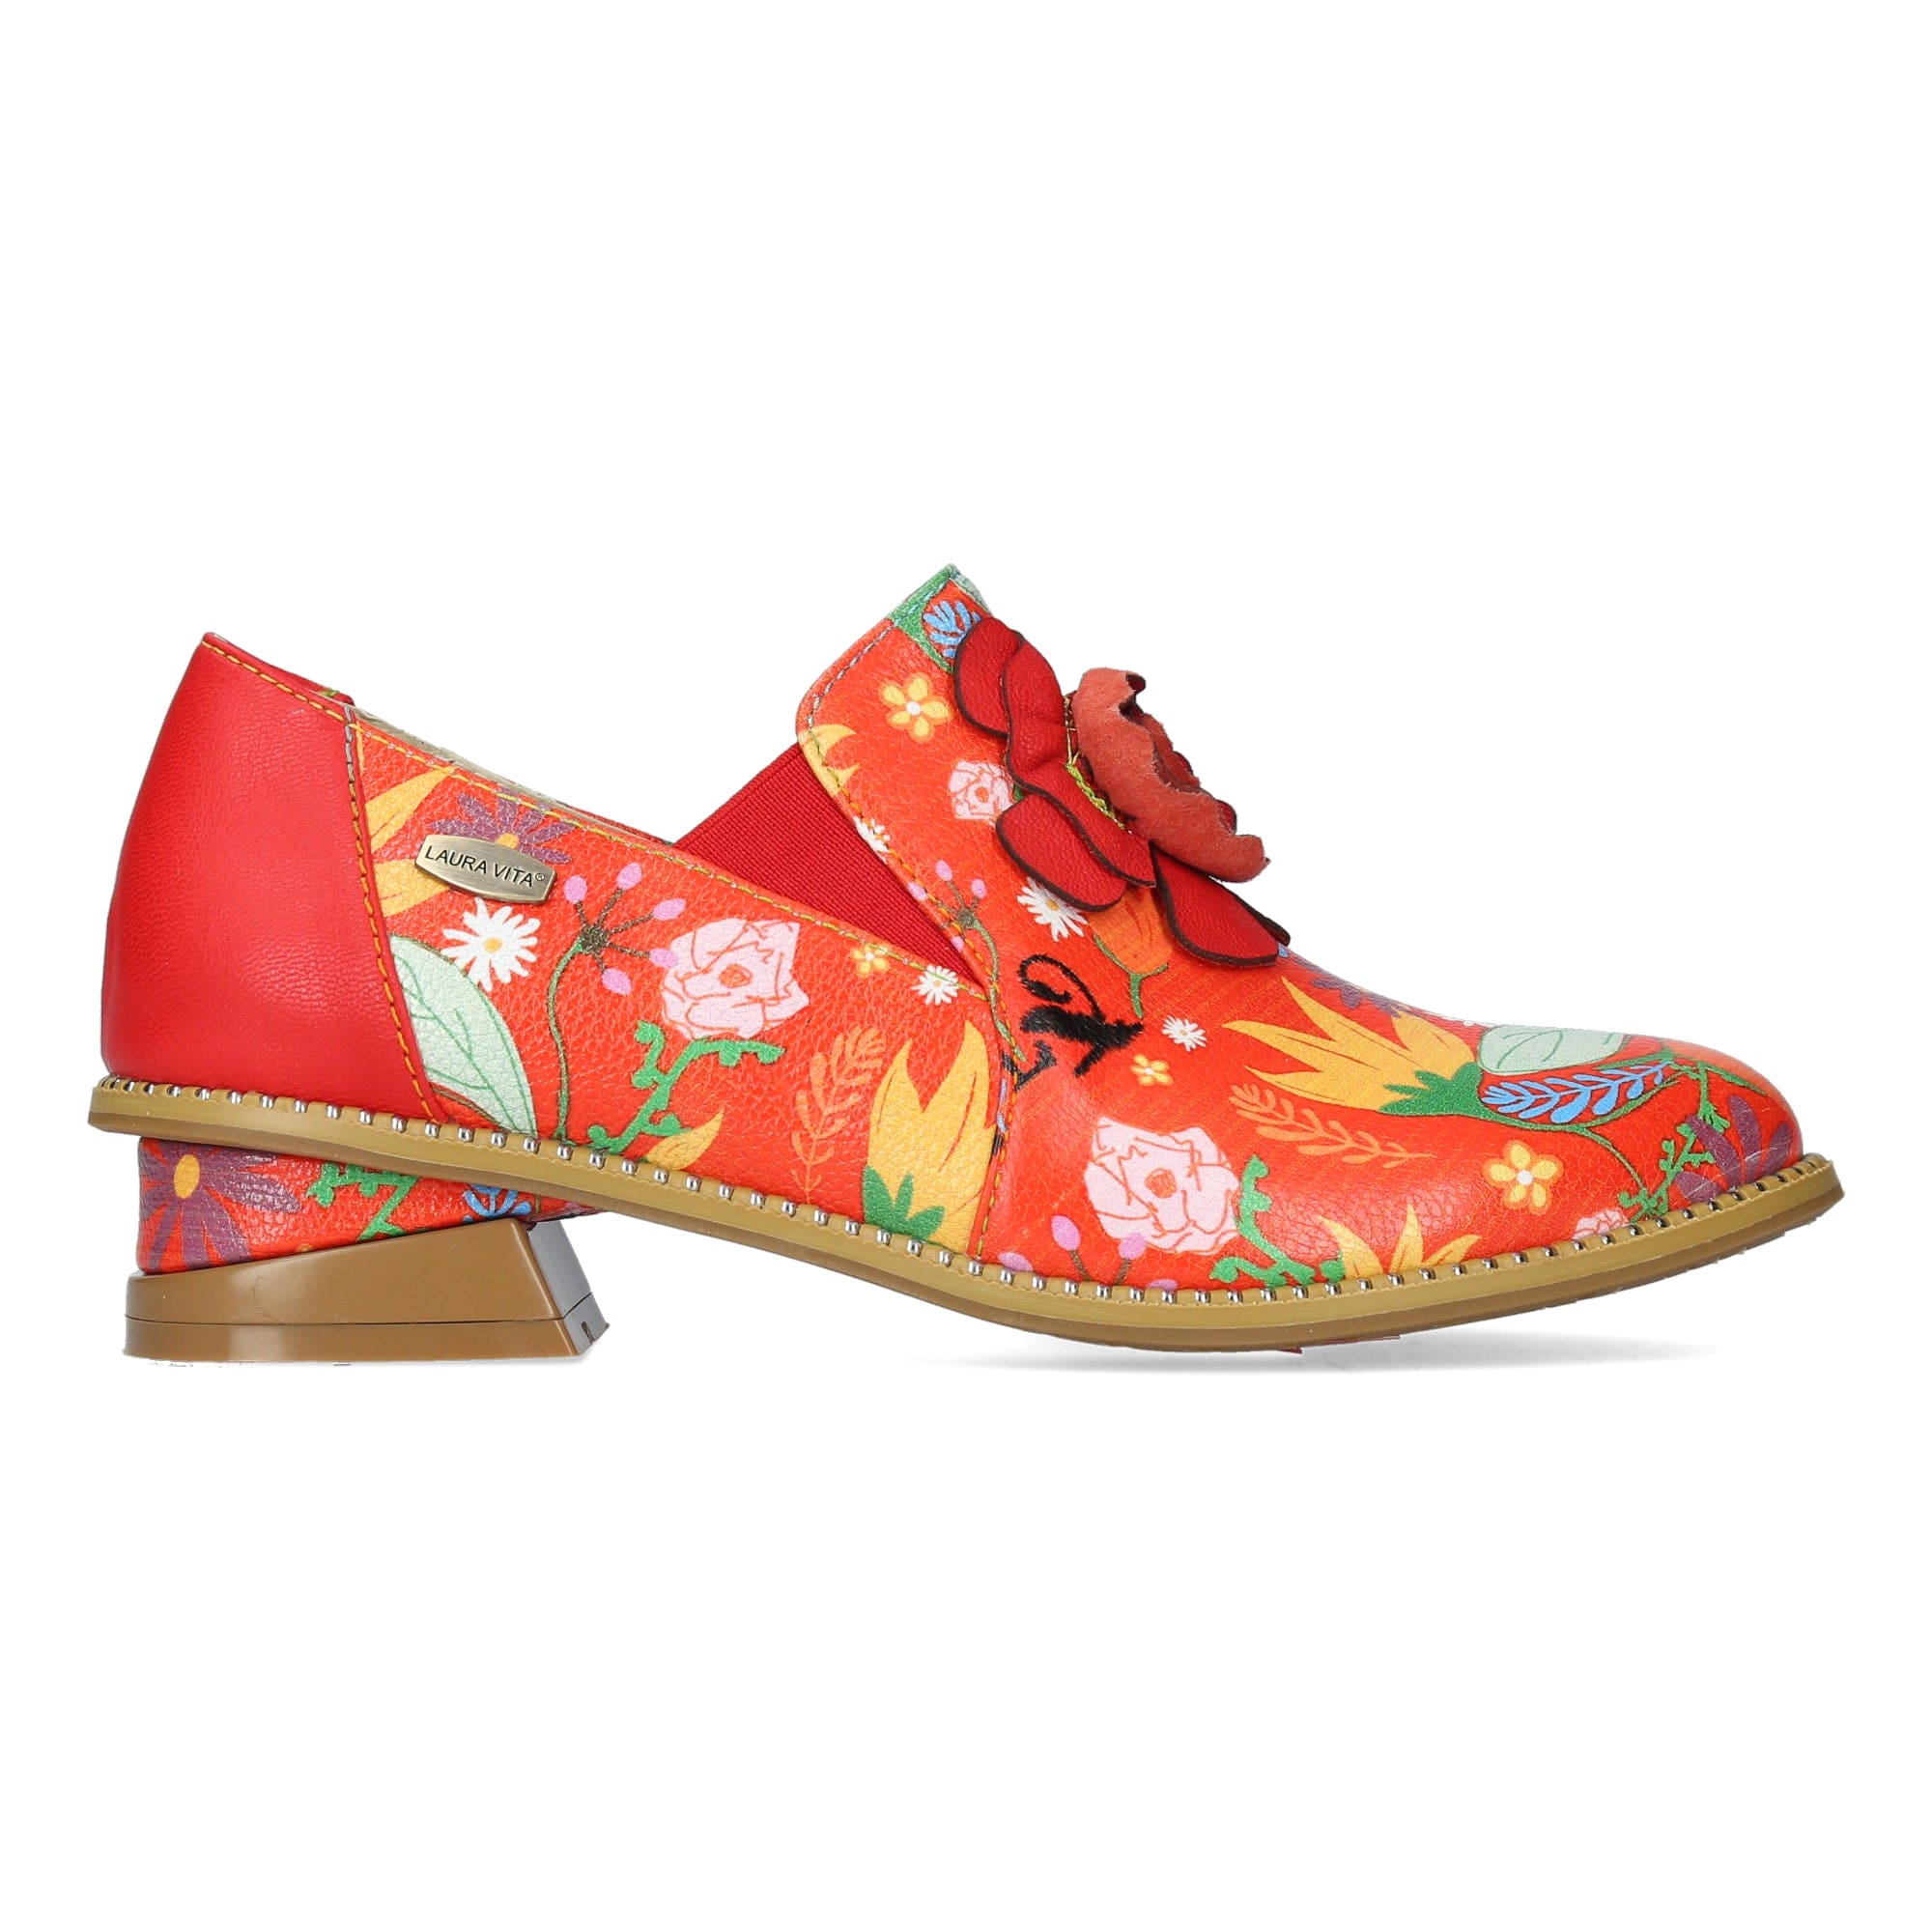 IBCIHALO 011 Flower - 35 / Cherry - Moccasin Shoes